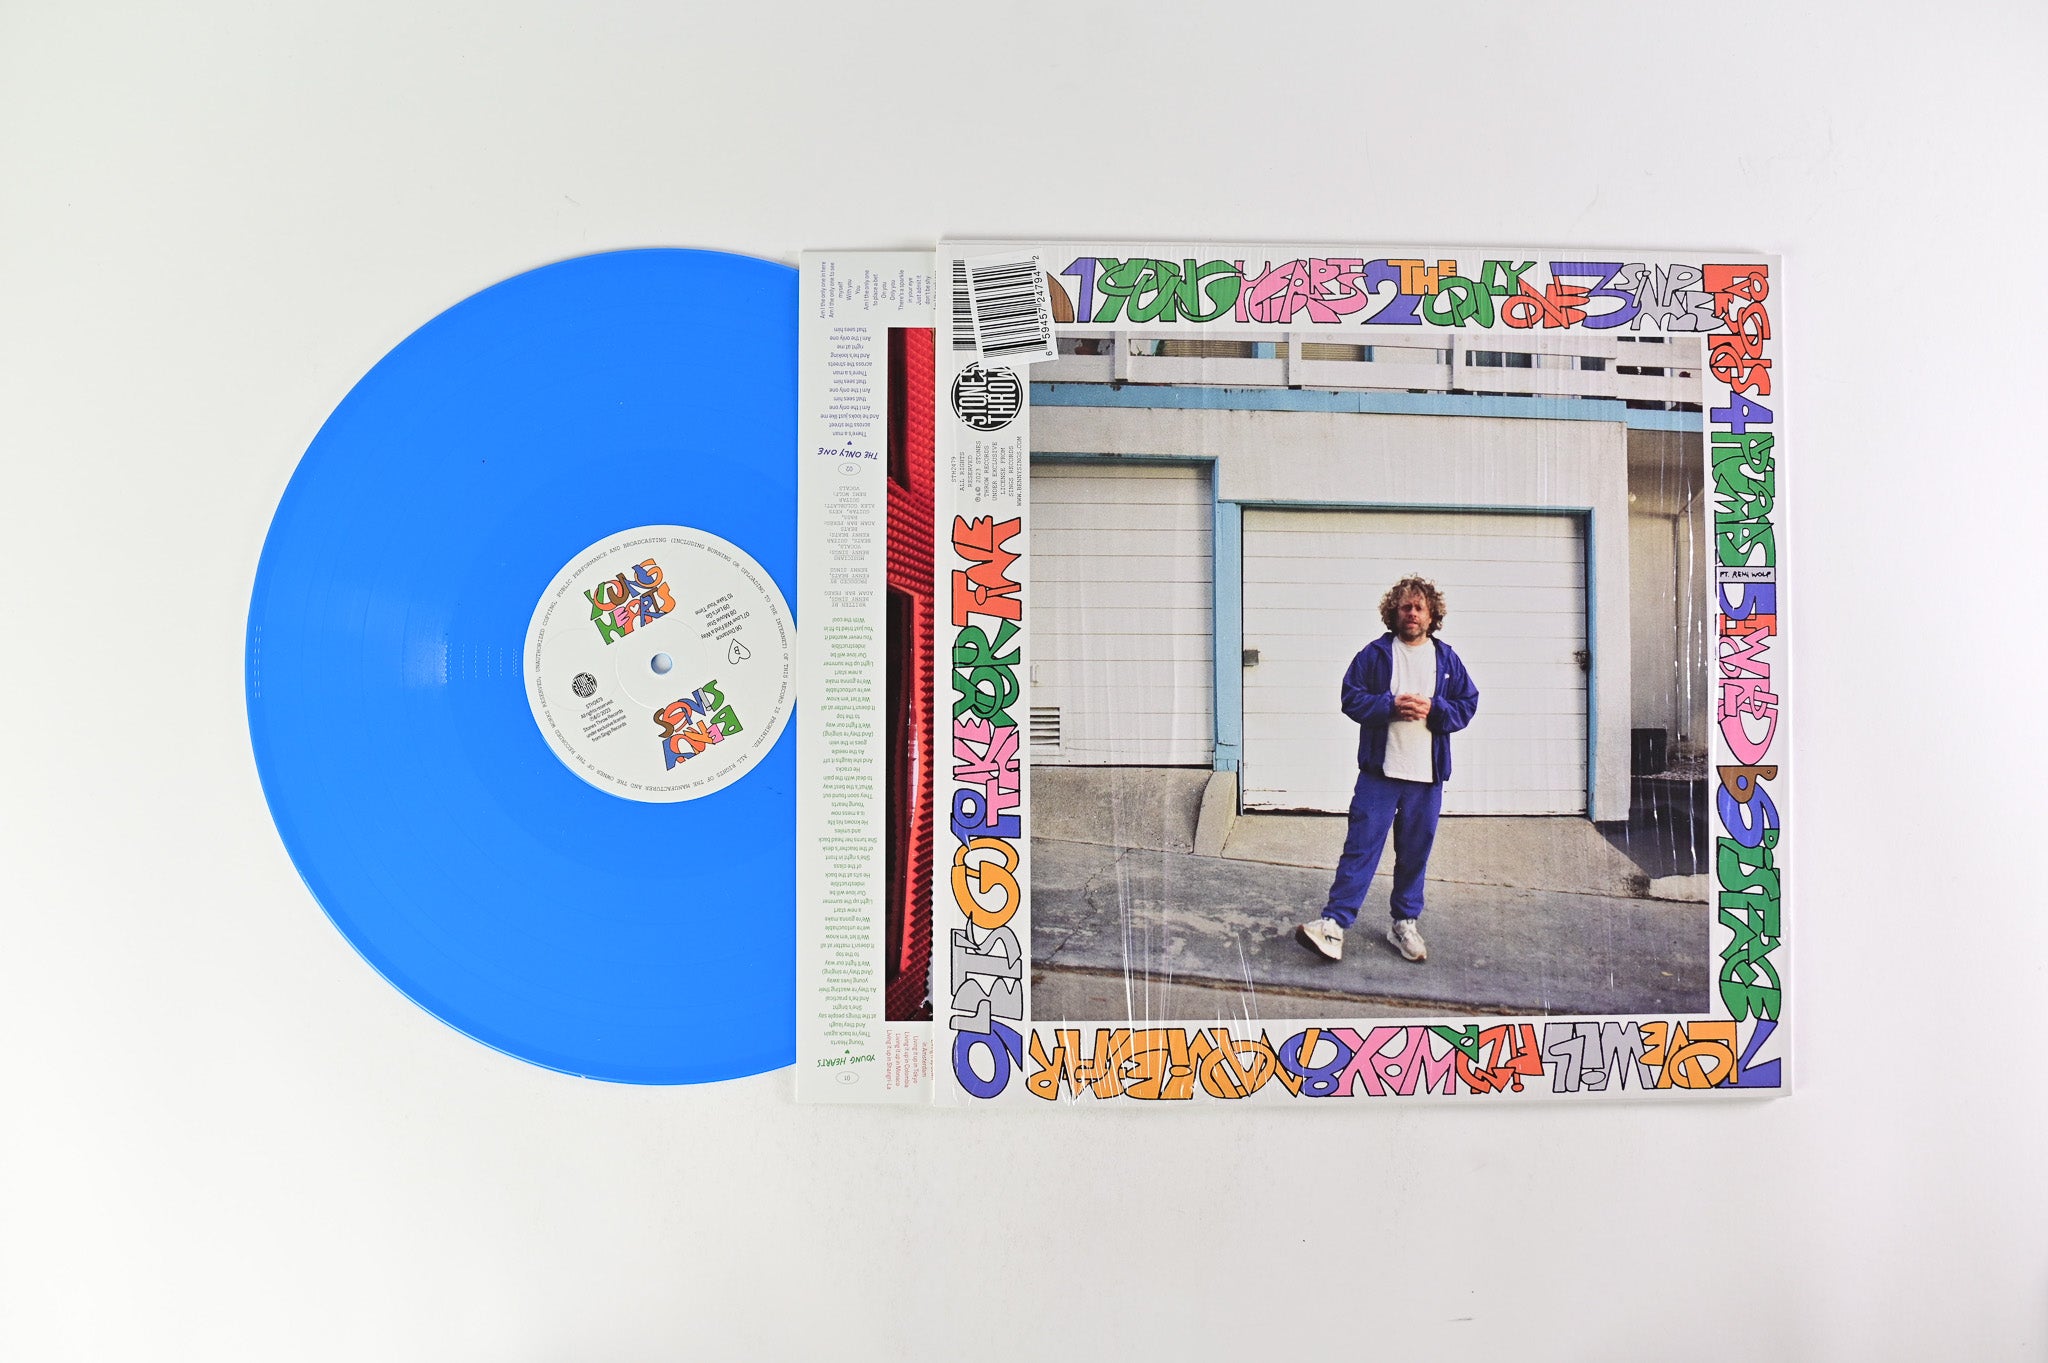 Benny Sings - Young Hearts on Stones Throw Records - Blue Vinyl